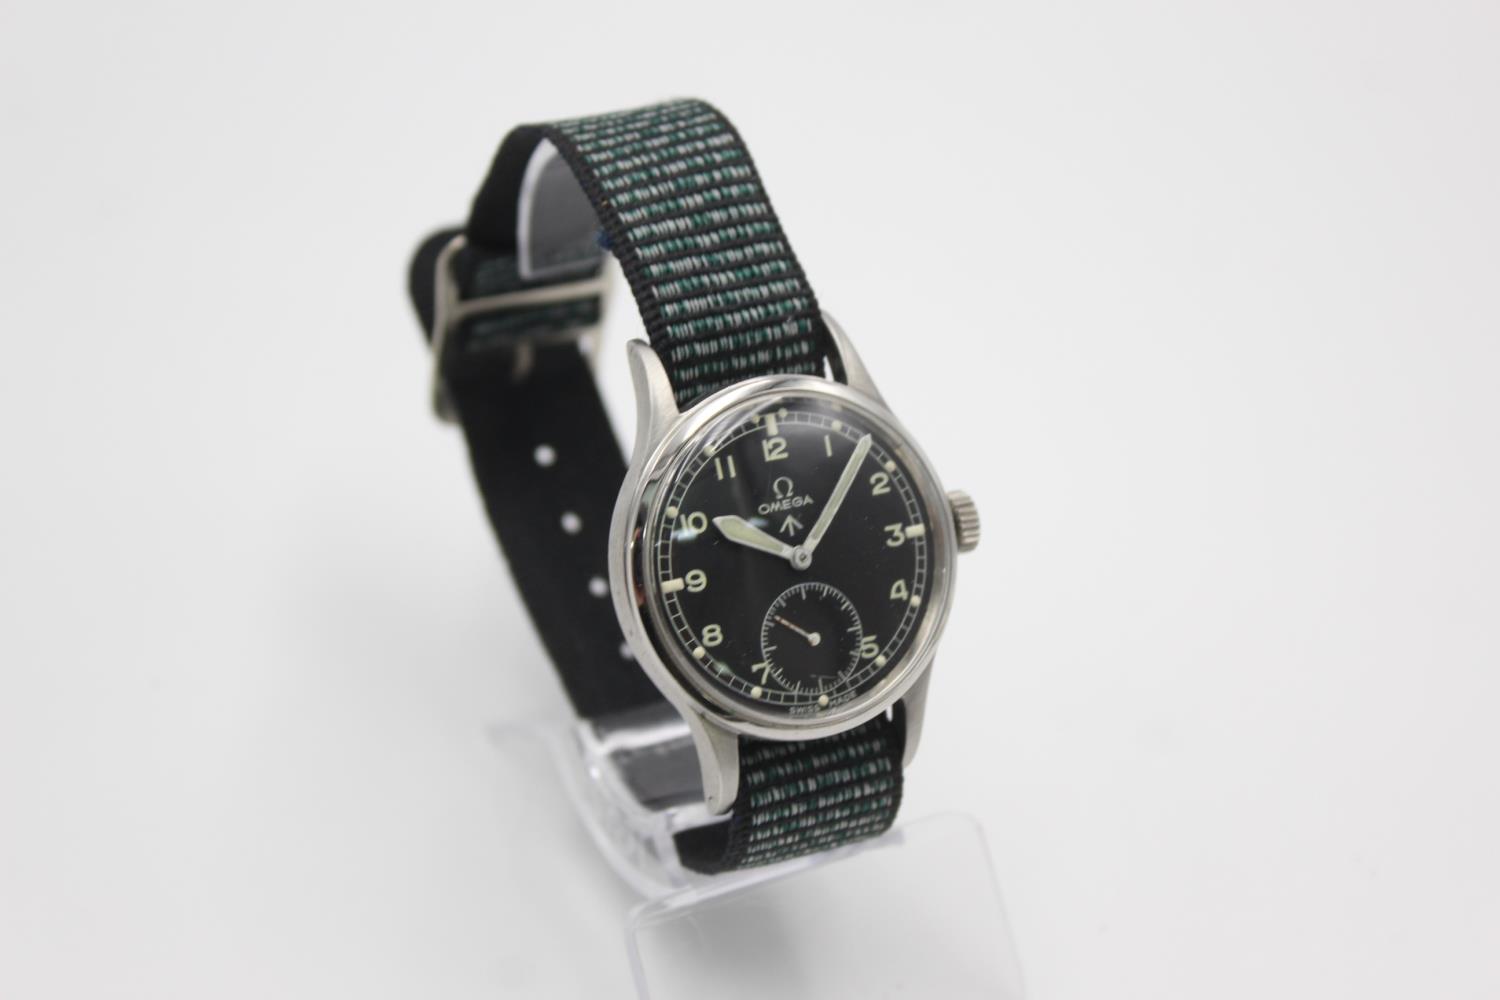 Vintage Gents OMEGA Military Issued WRISTWATCH Hand-Wind WORKING Vintage Gents OMEGA Military Issu - Image 2 of 7